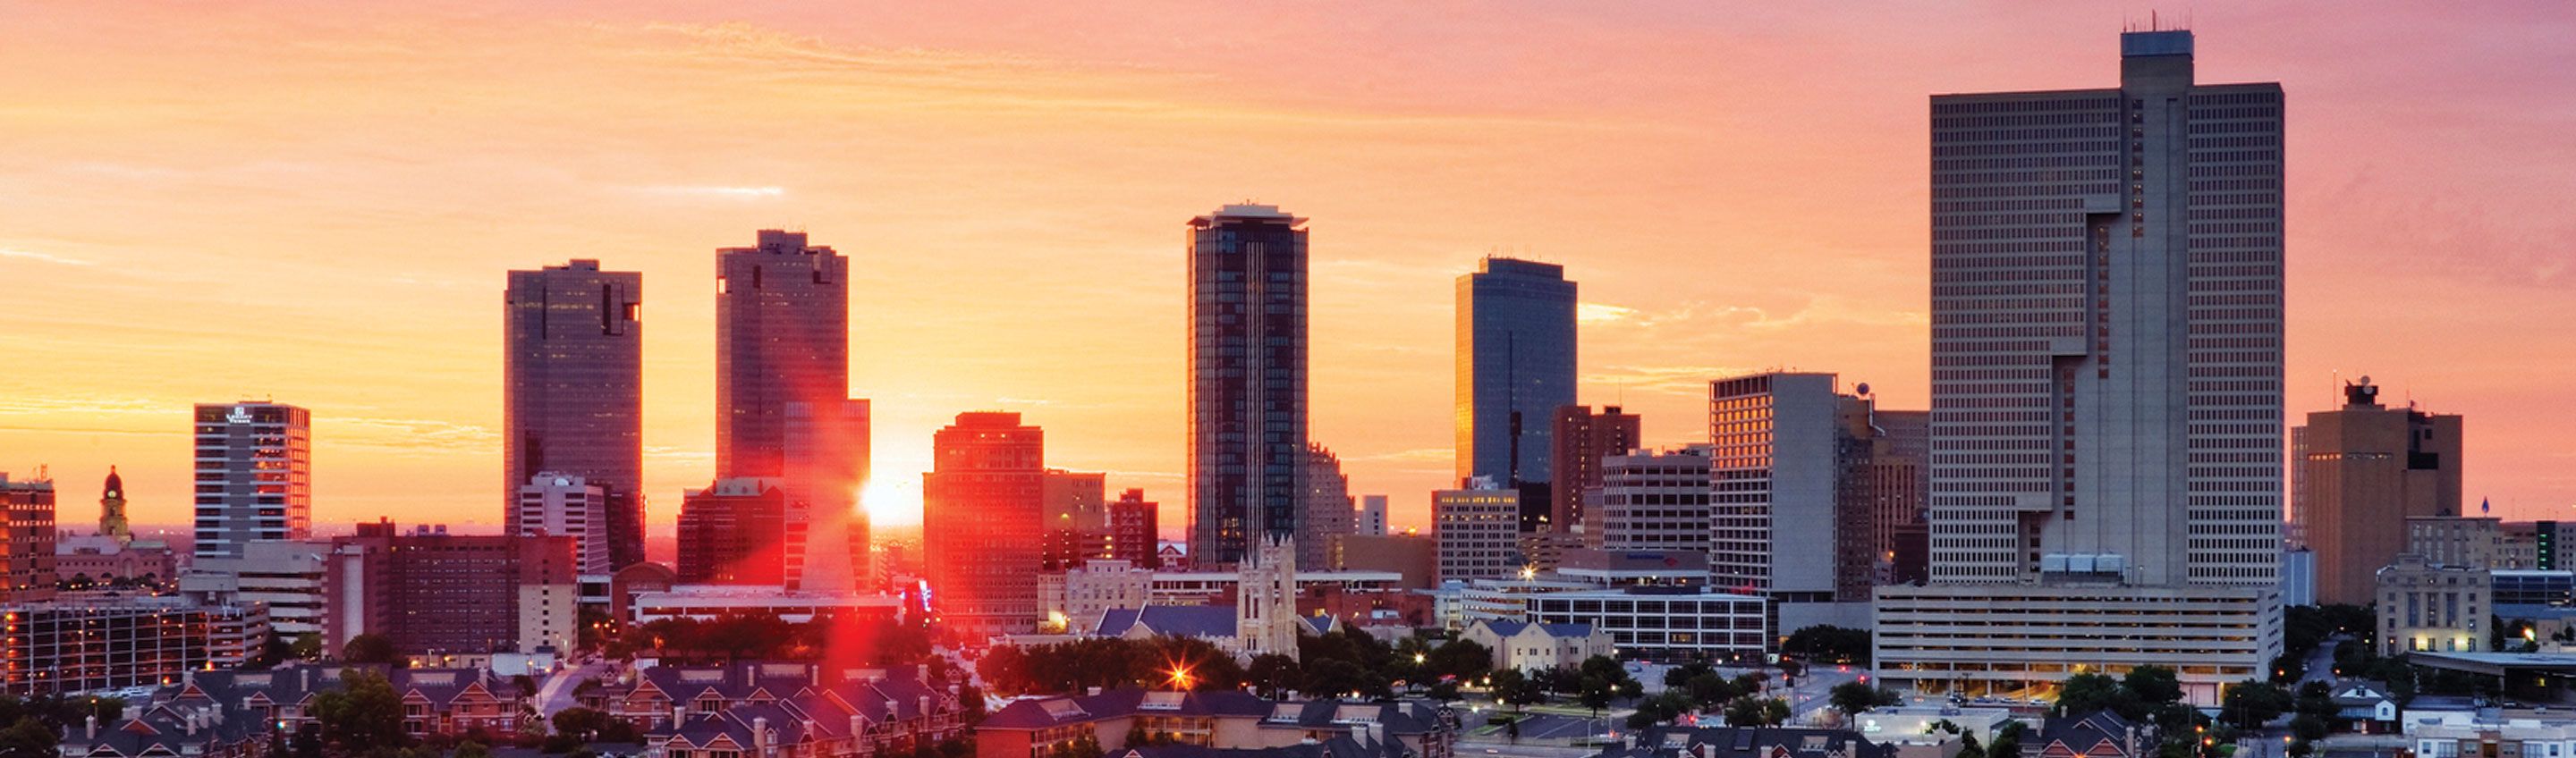 aireal view of Fort Worth city scape with sun setting behind skyscrapers 